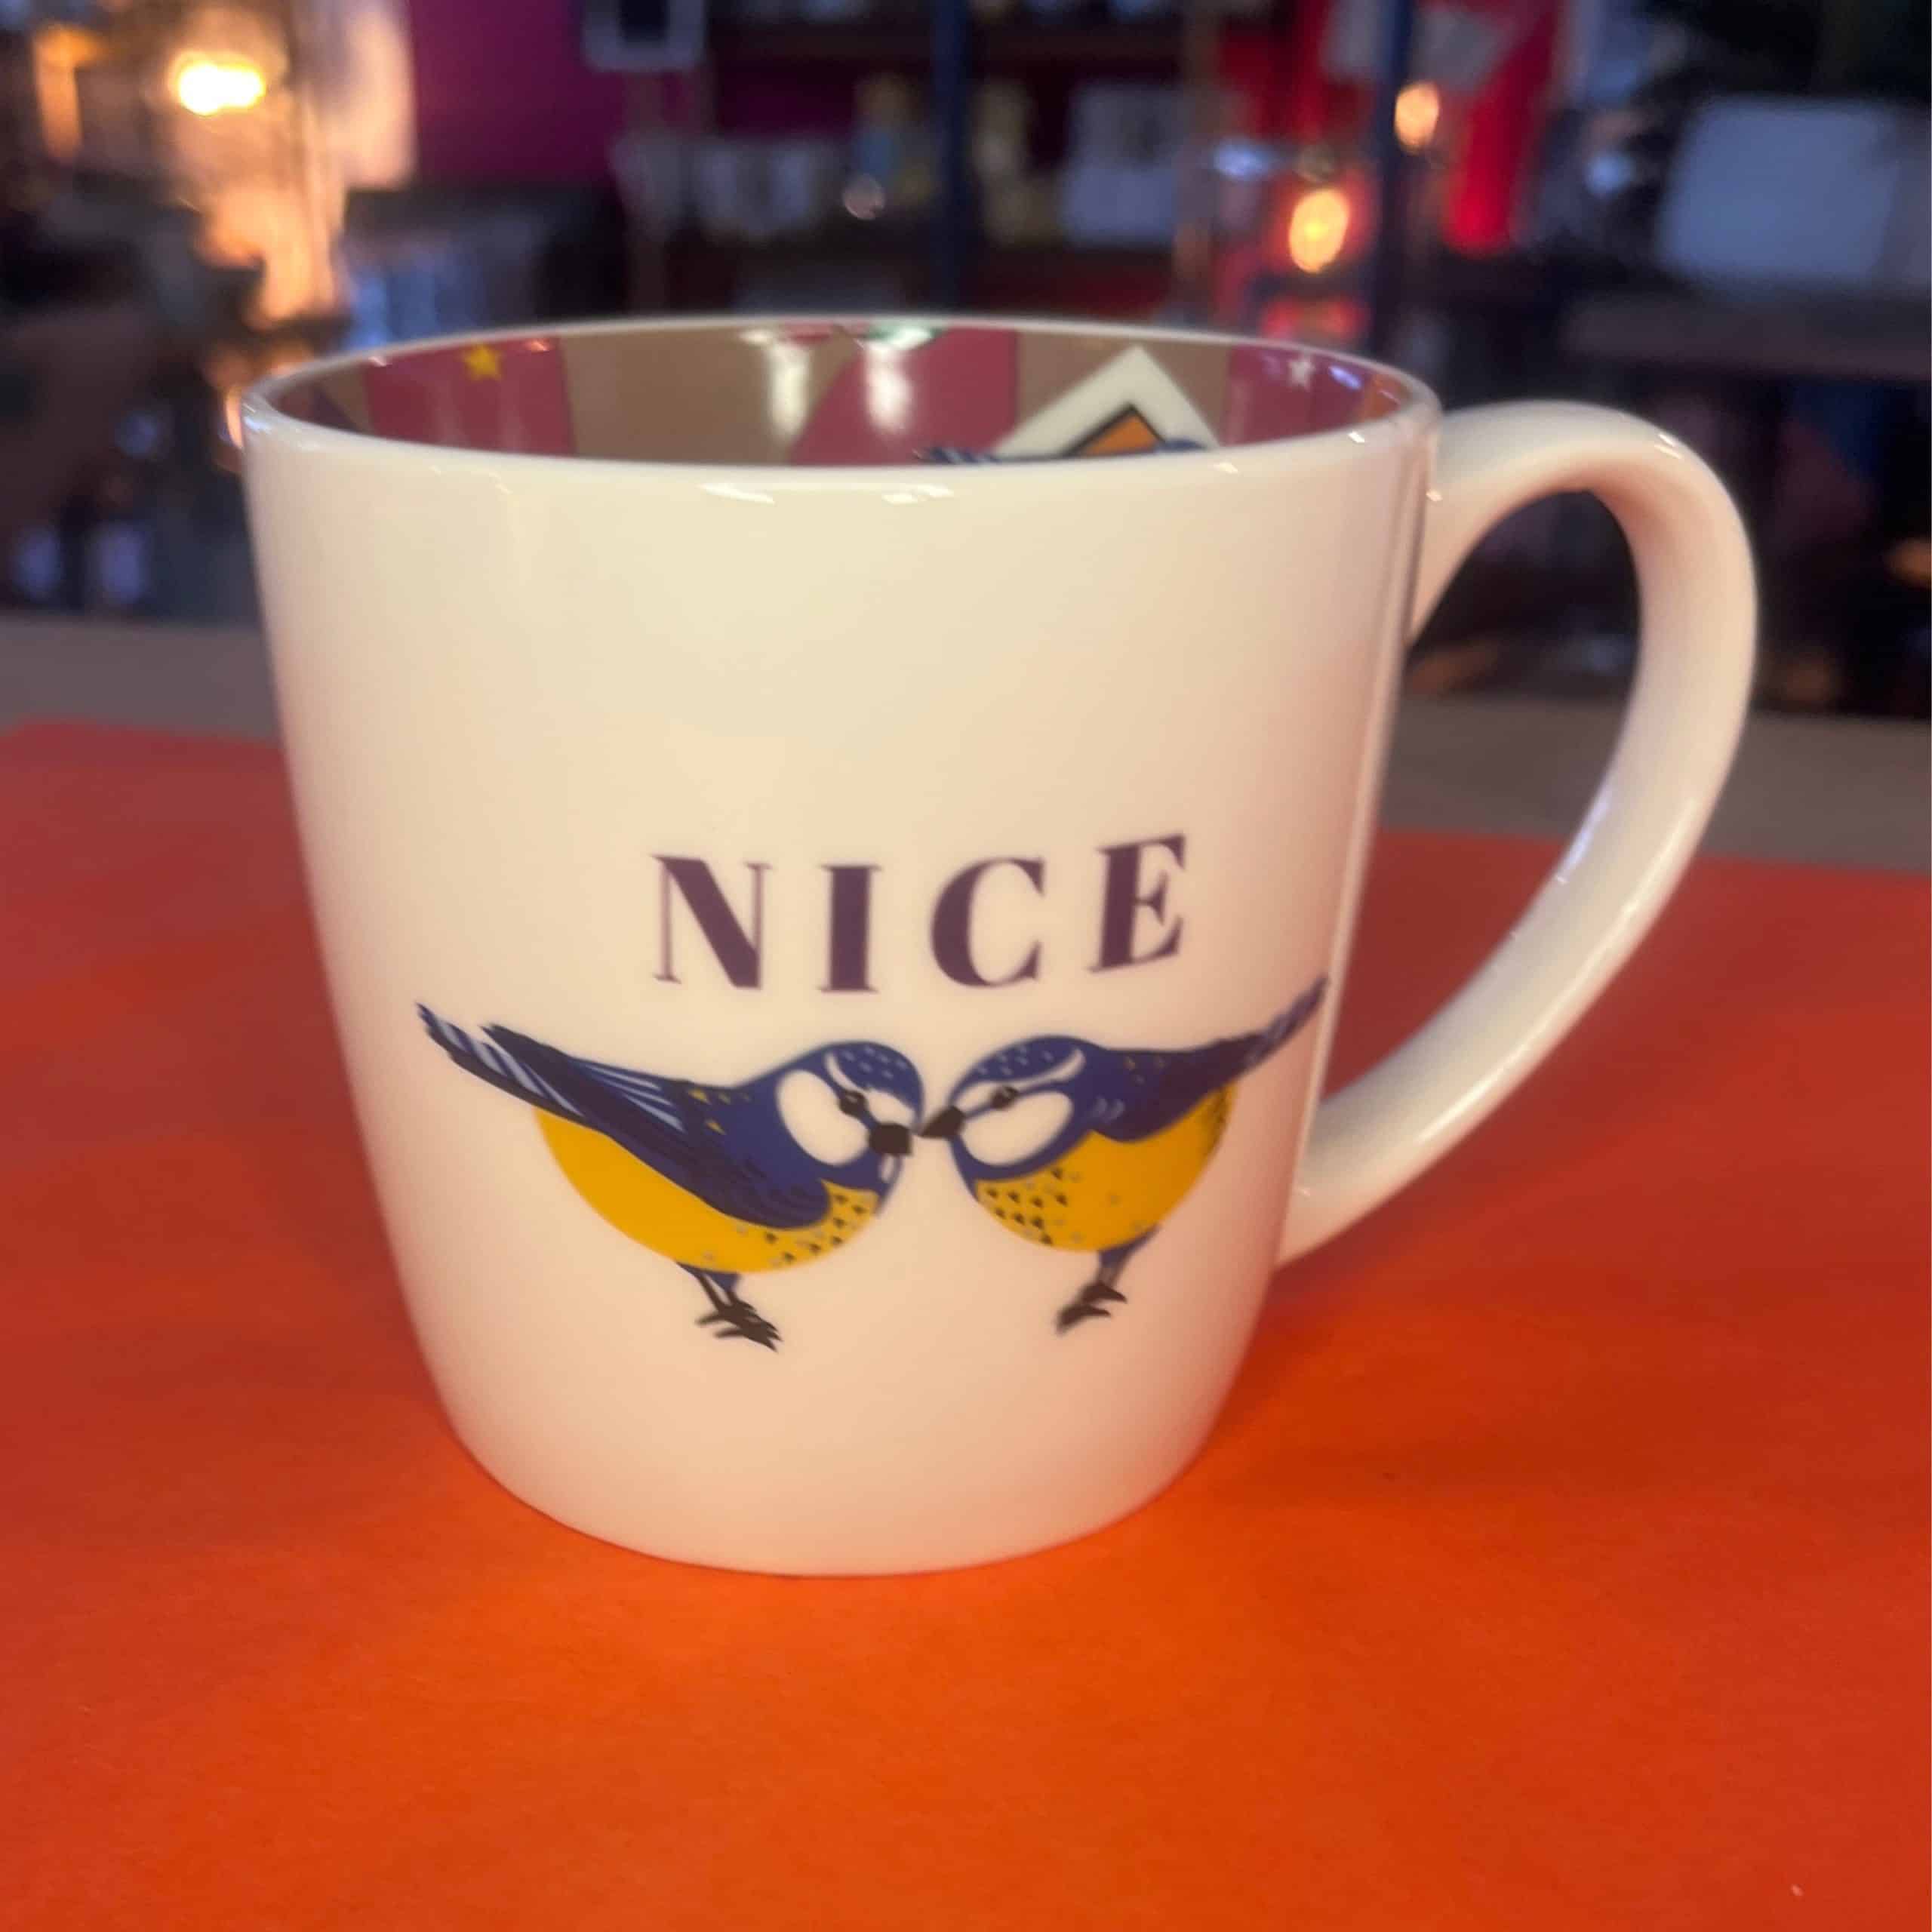 cliff duke recommends nice a cup tits pic